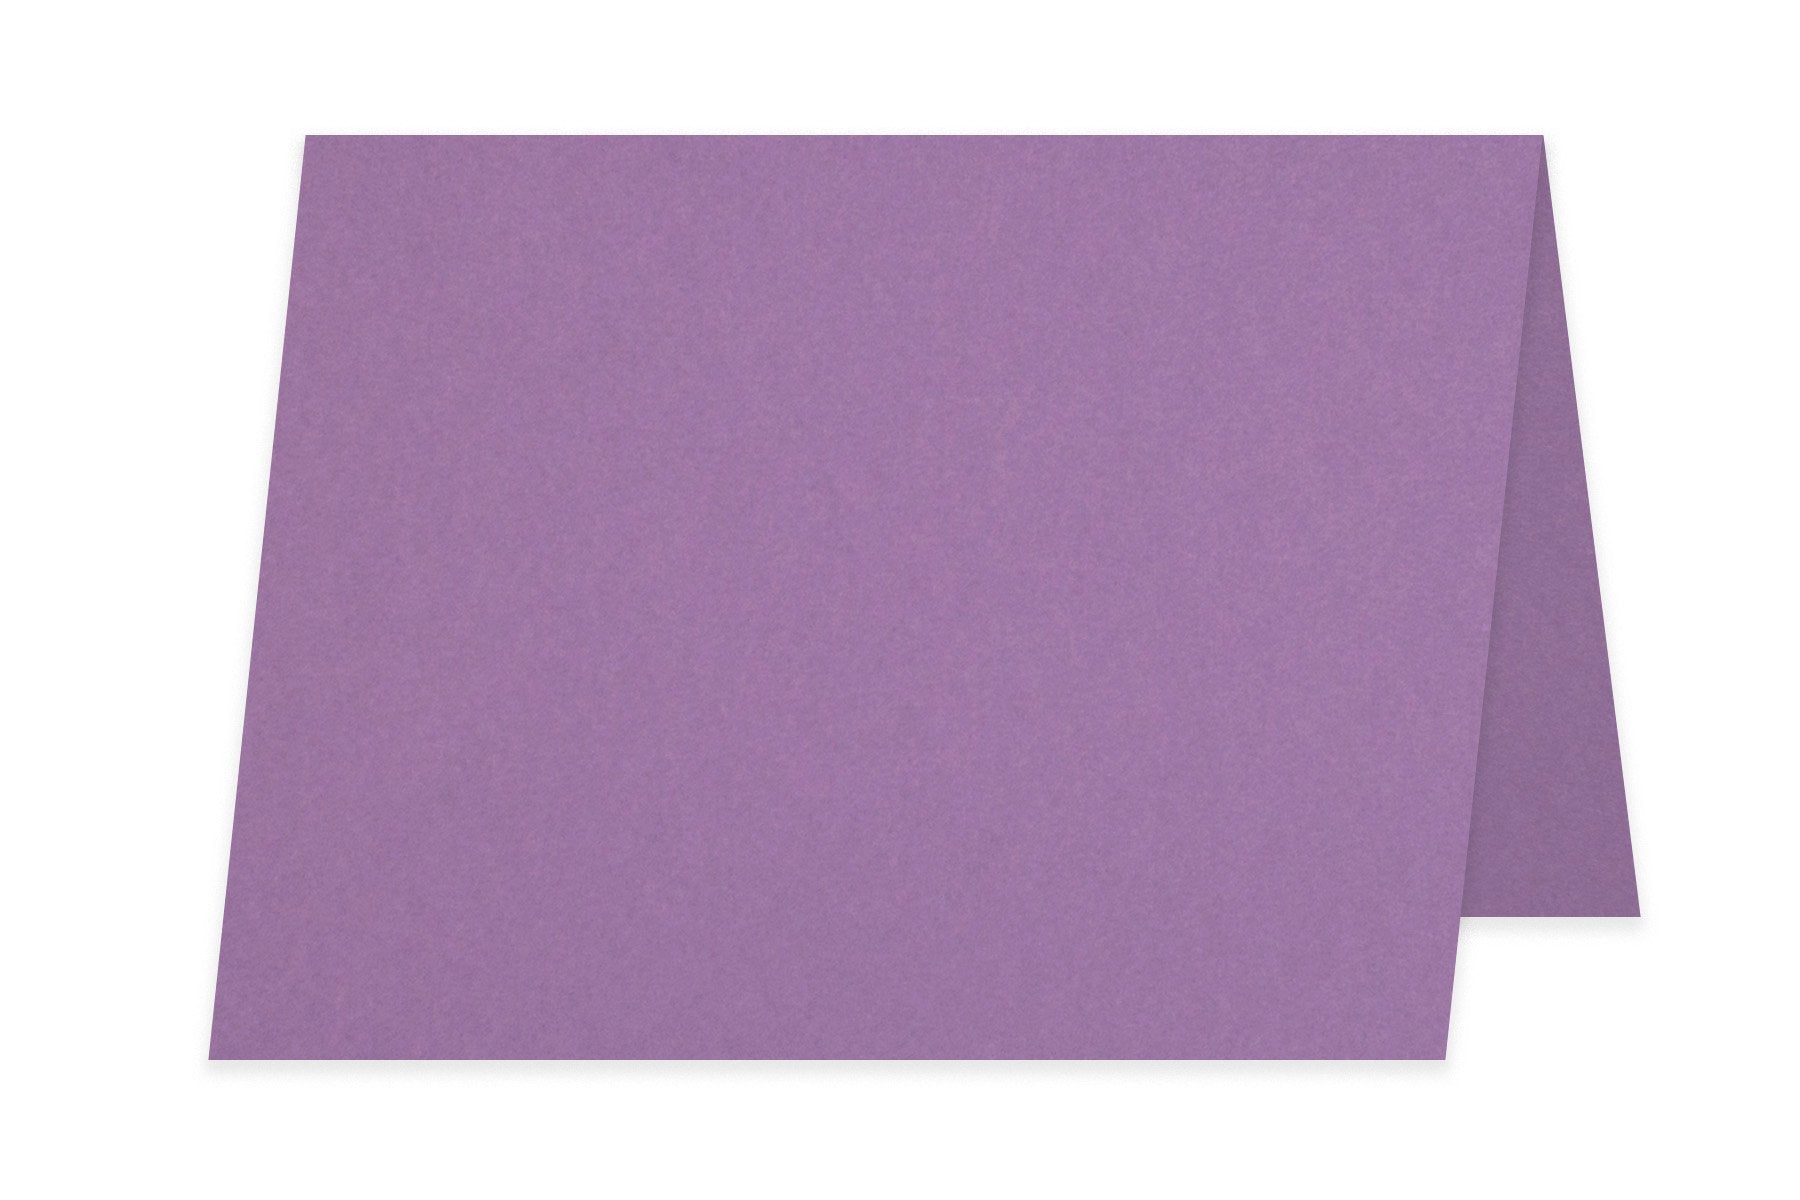 Basis A-1 Folded Discount Card Stock - Blank A1 Note Cards